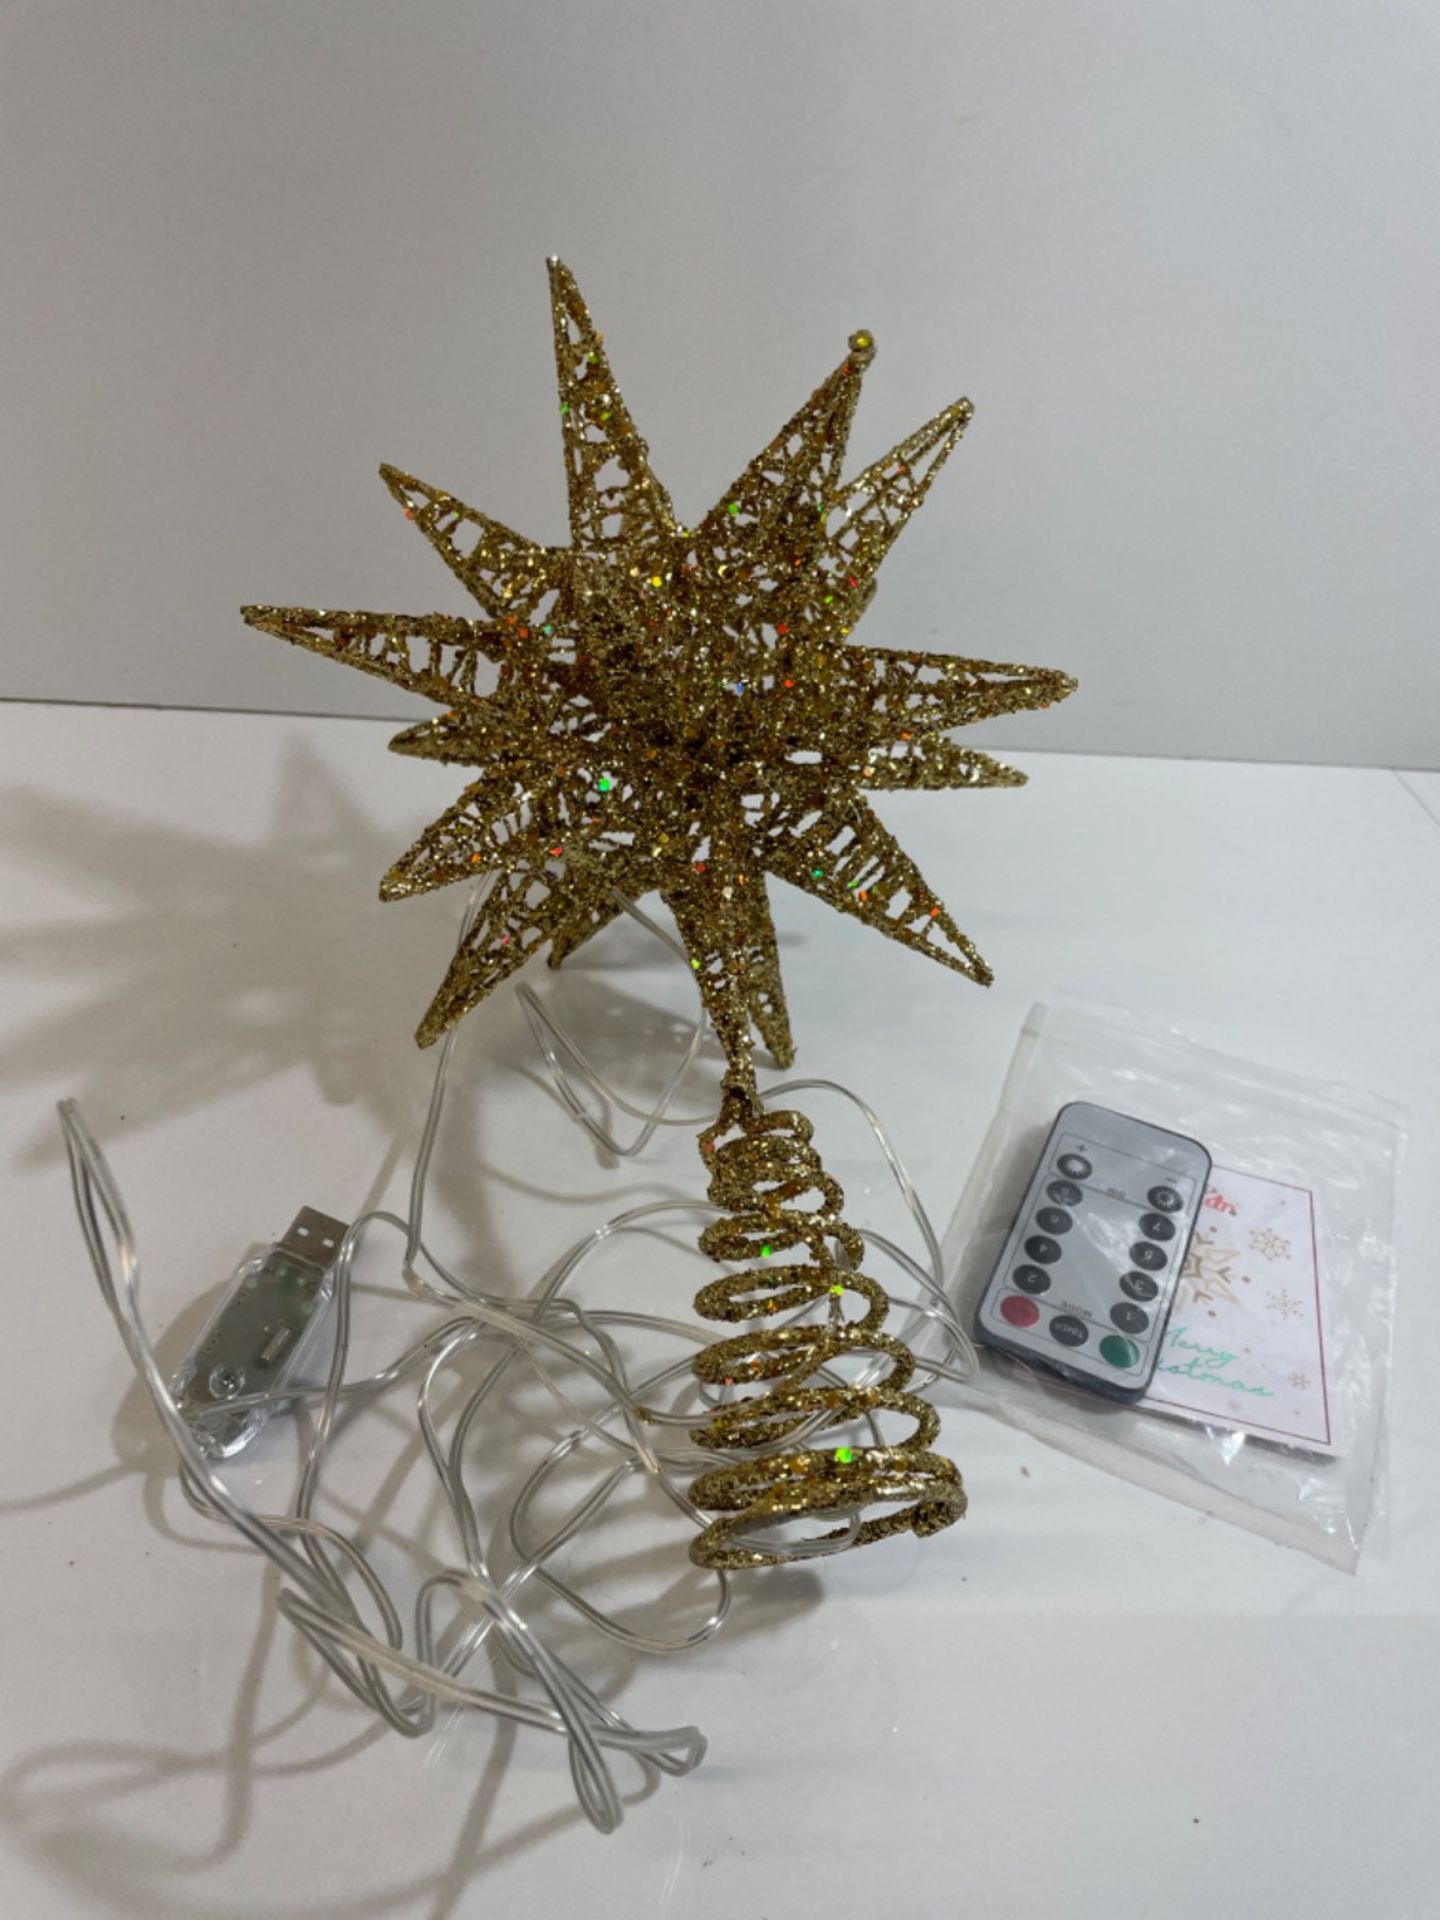 Lewondr Christmas Star Tree Topper, 3D Geometric Star USB Powered Remote Controlled Treetop Star wi - Image 3 of 3